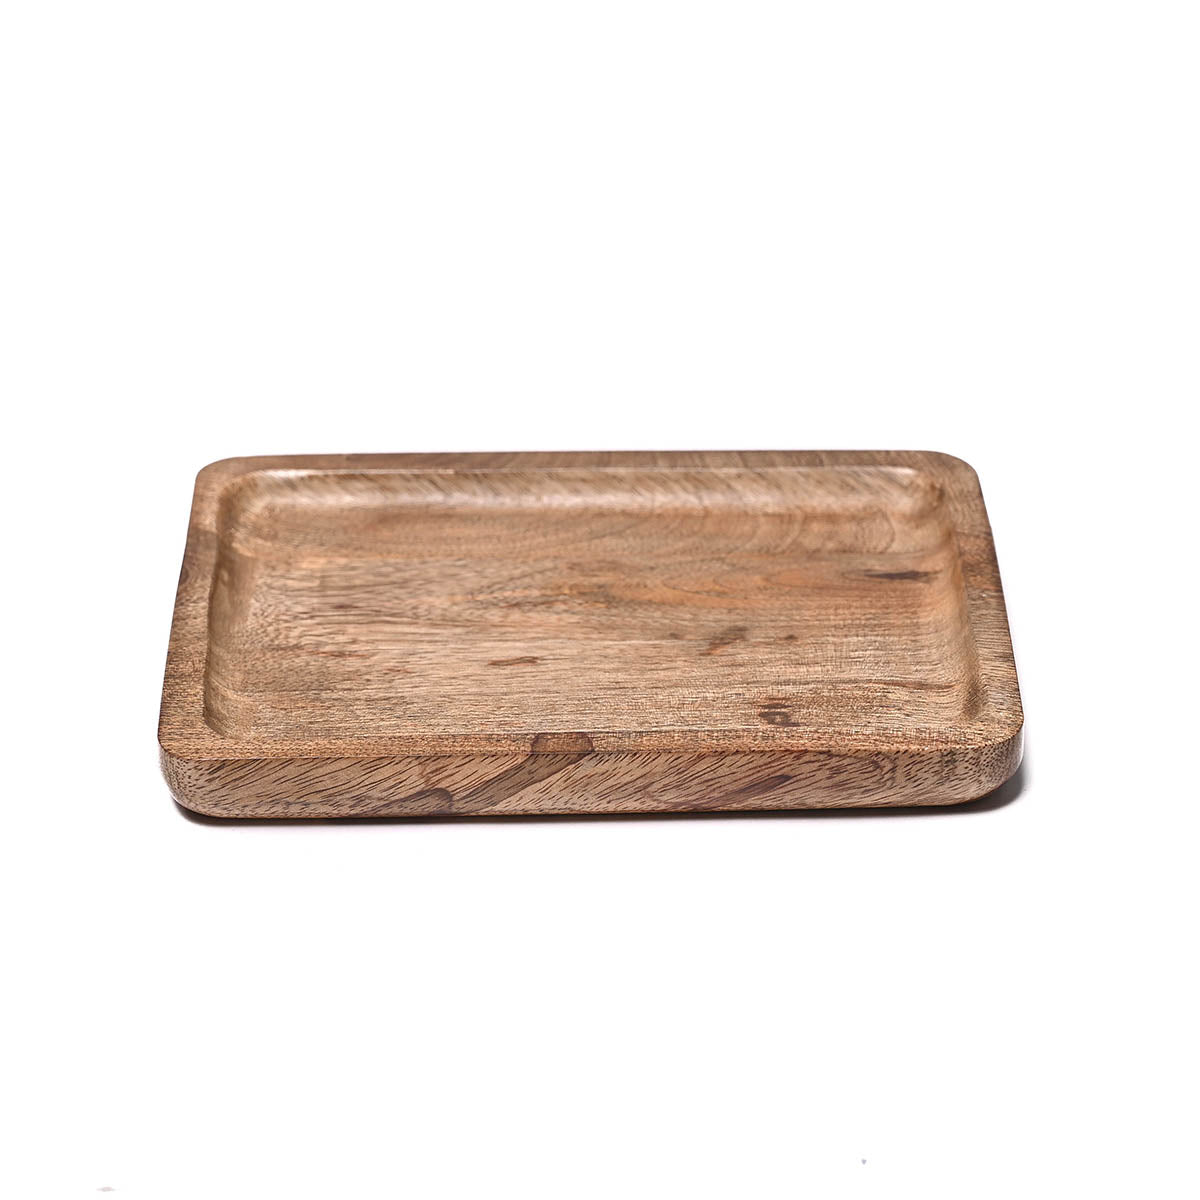 Small wooden tray, round edged rustic serving tray, farmhouse decor, 5X7 inches